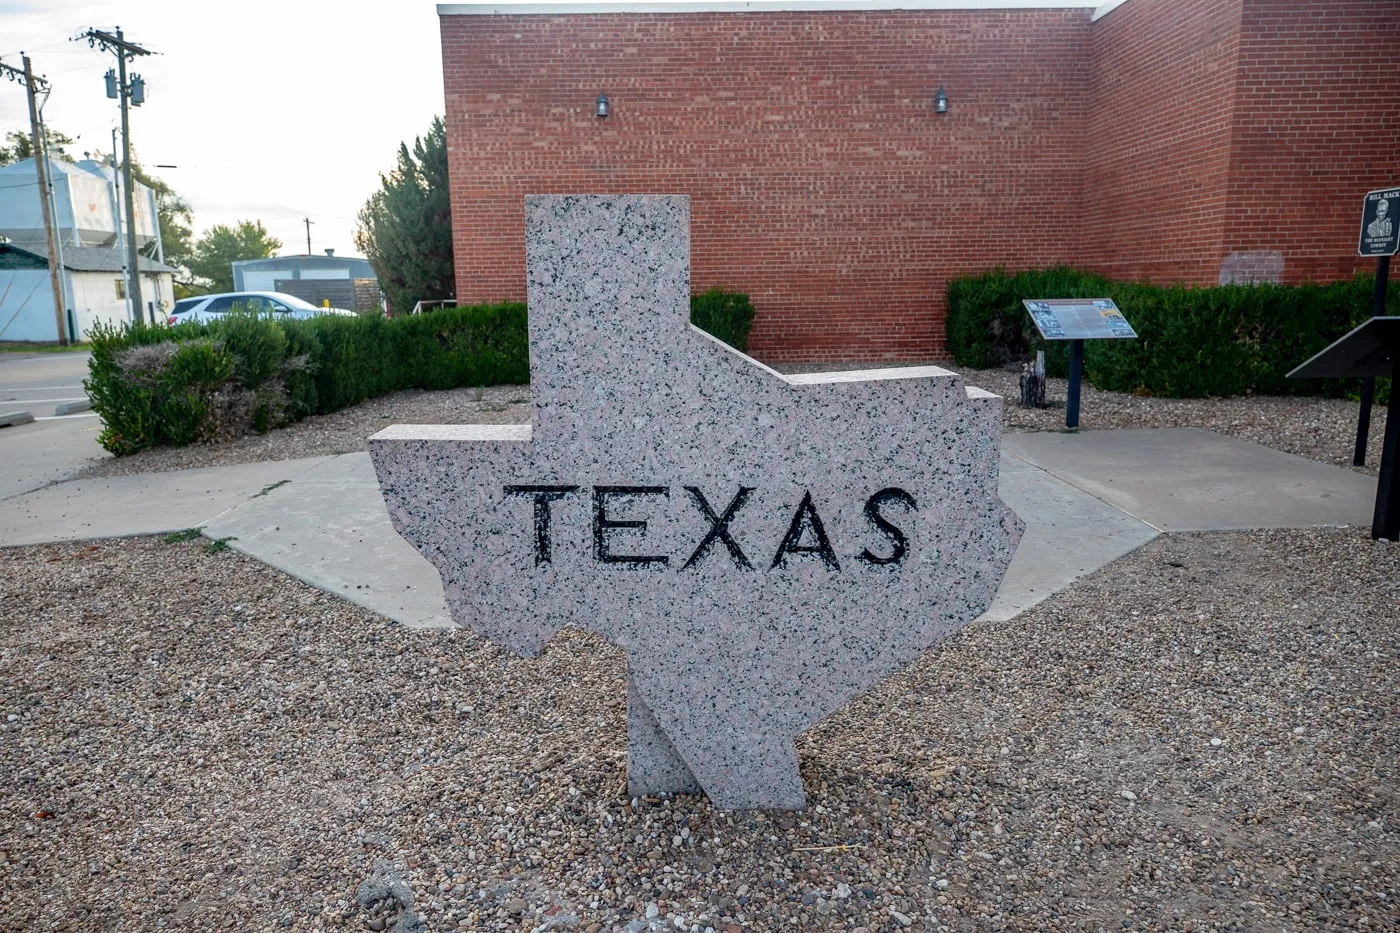 Texas-shaped Marker in Shamrock, Texas on Route 66